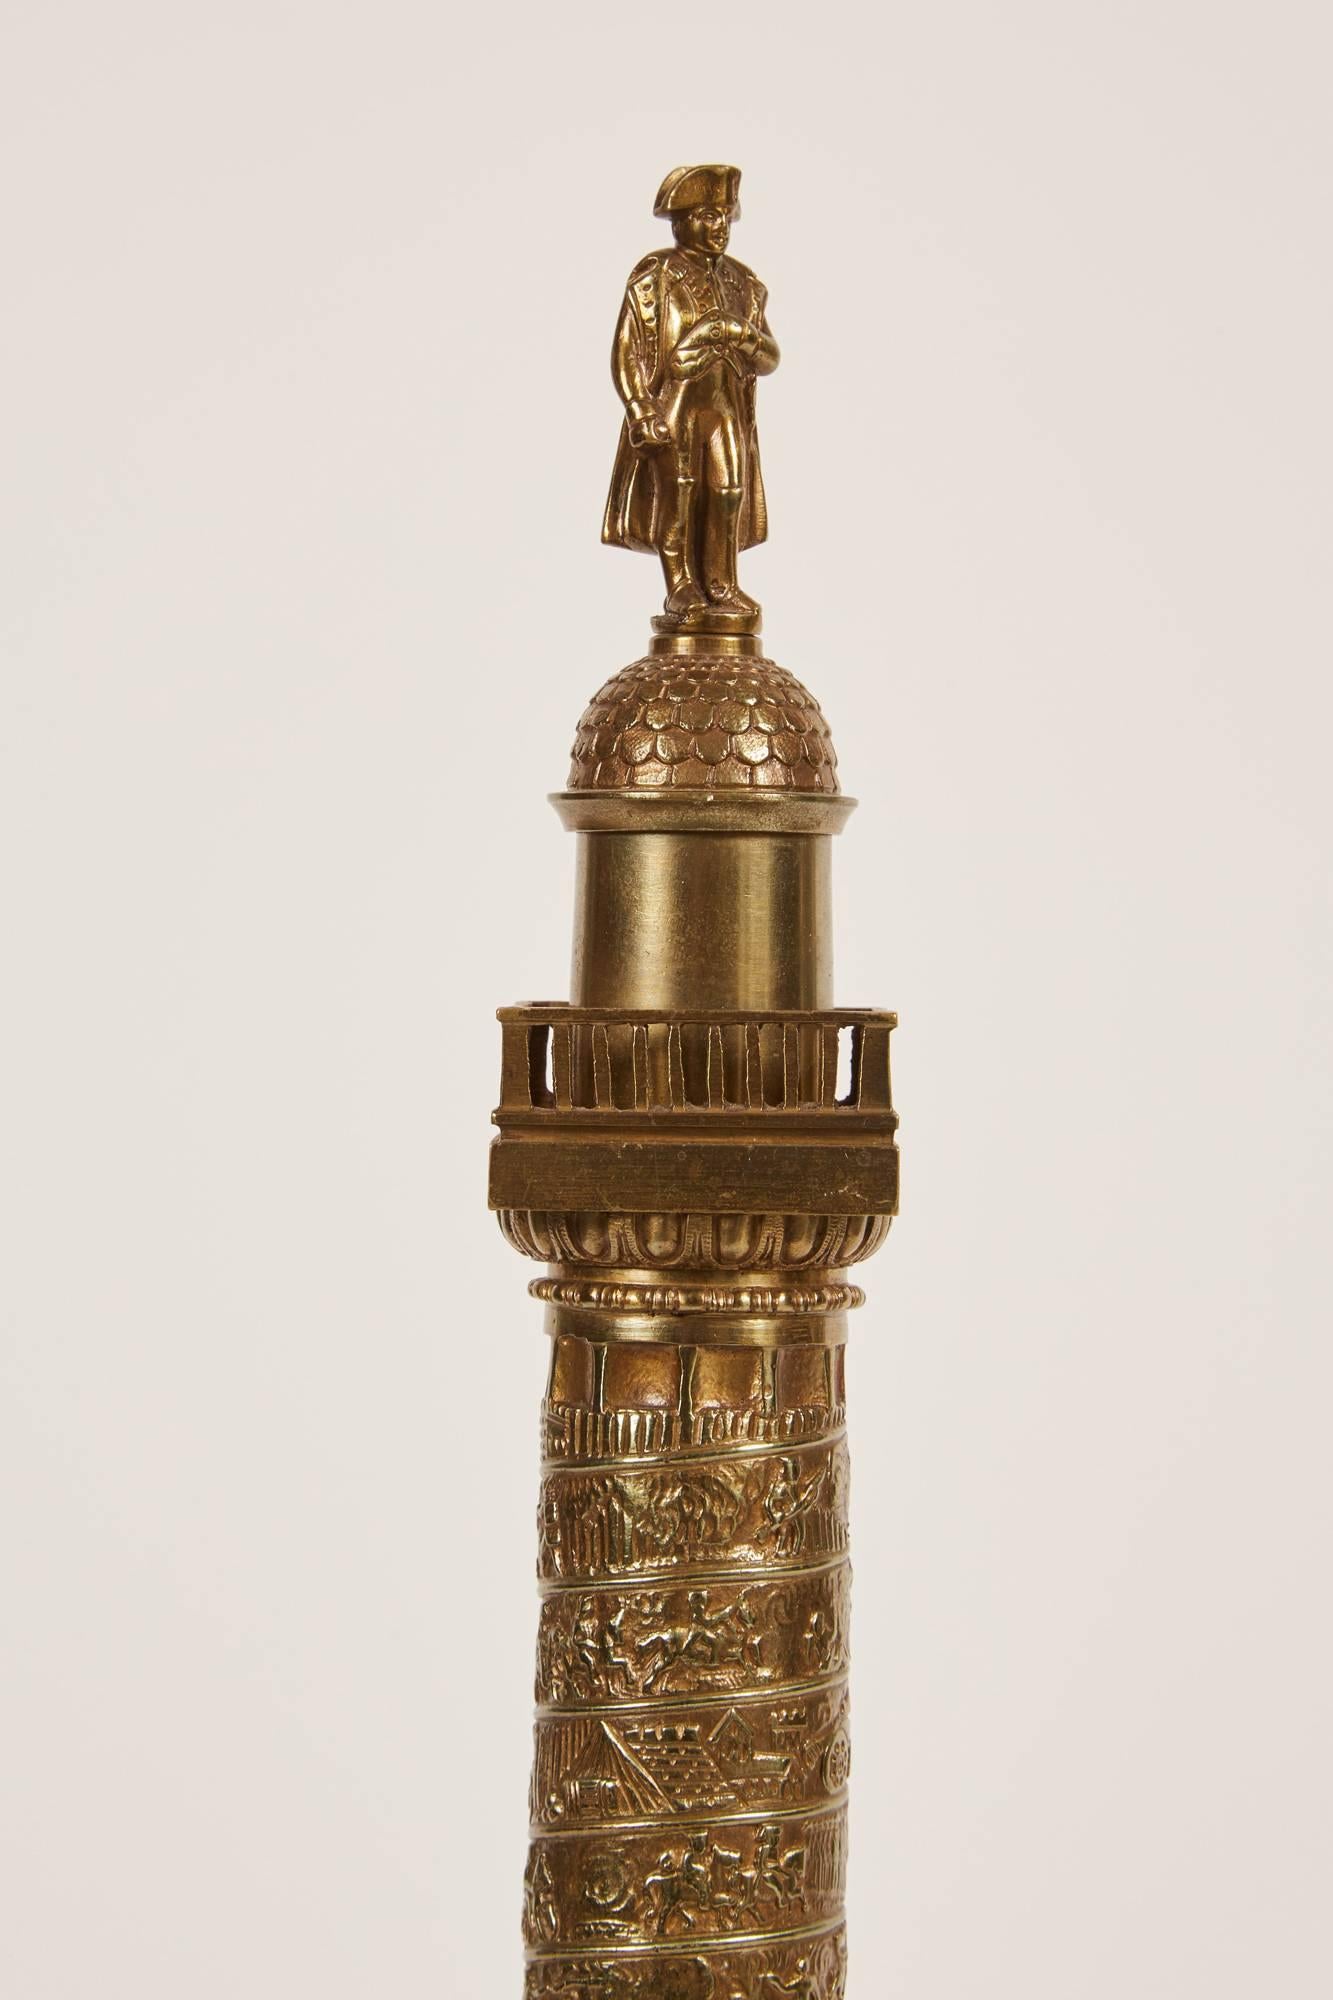 This 19th century bronze model is representing the Colonne De La Grande Armée found in Wimille, France. It was constructed to be a column honouring the soldiers of the Grande Armée and features a spiral frieze that recounts the Campaign, from the